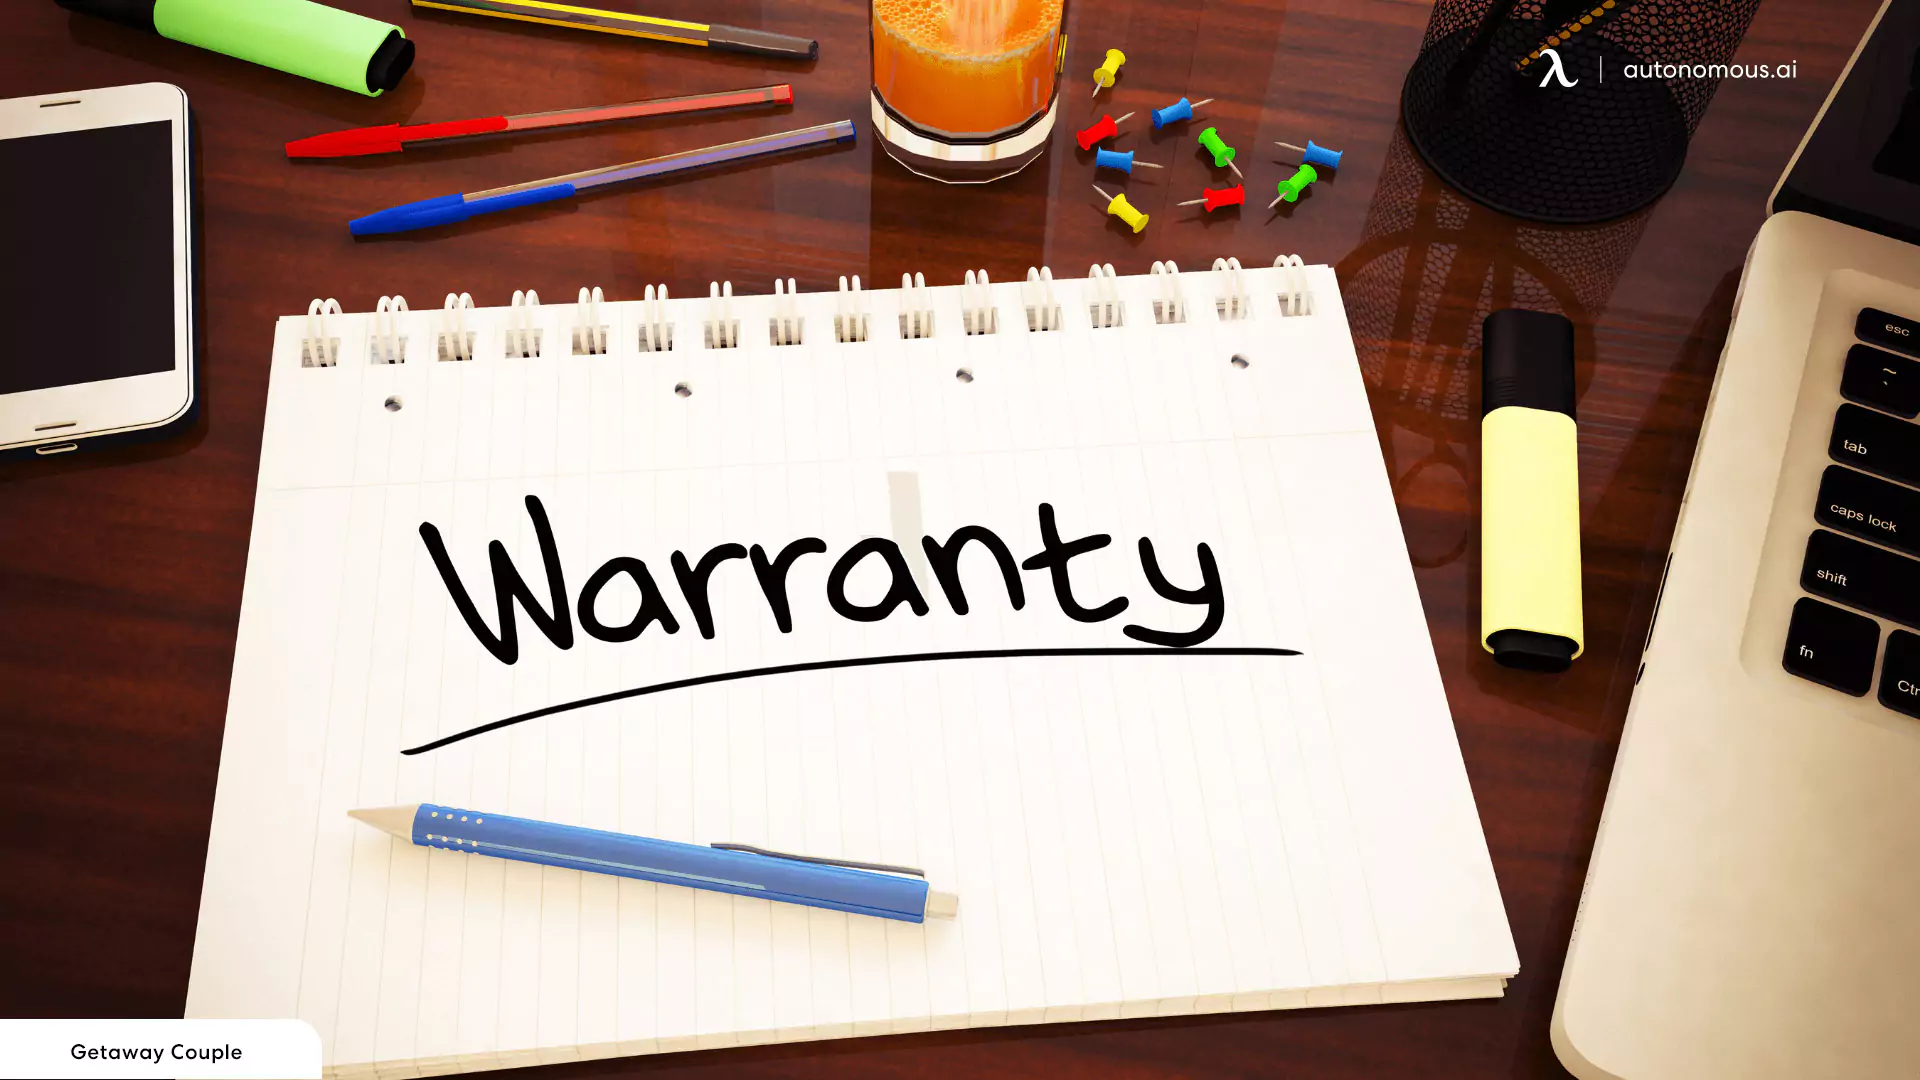 Price and Warranty